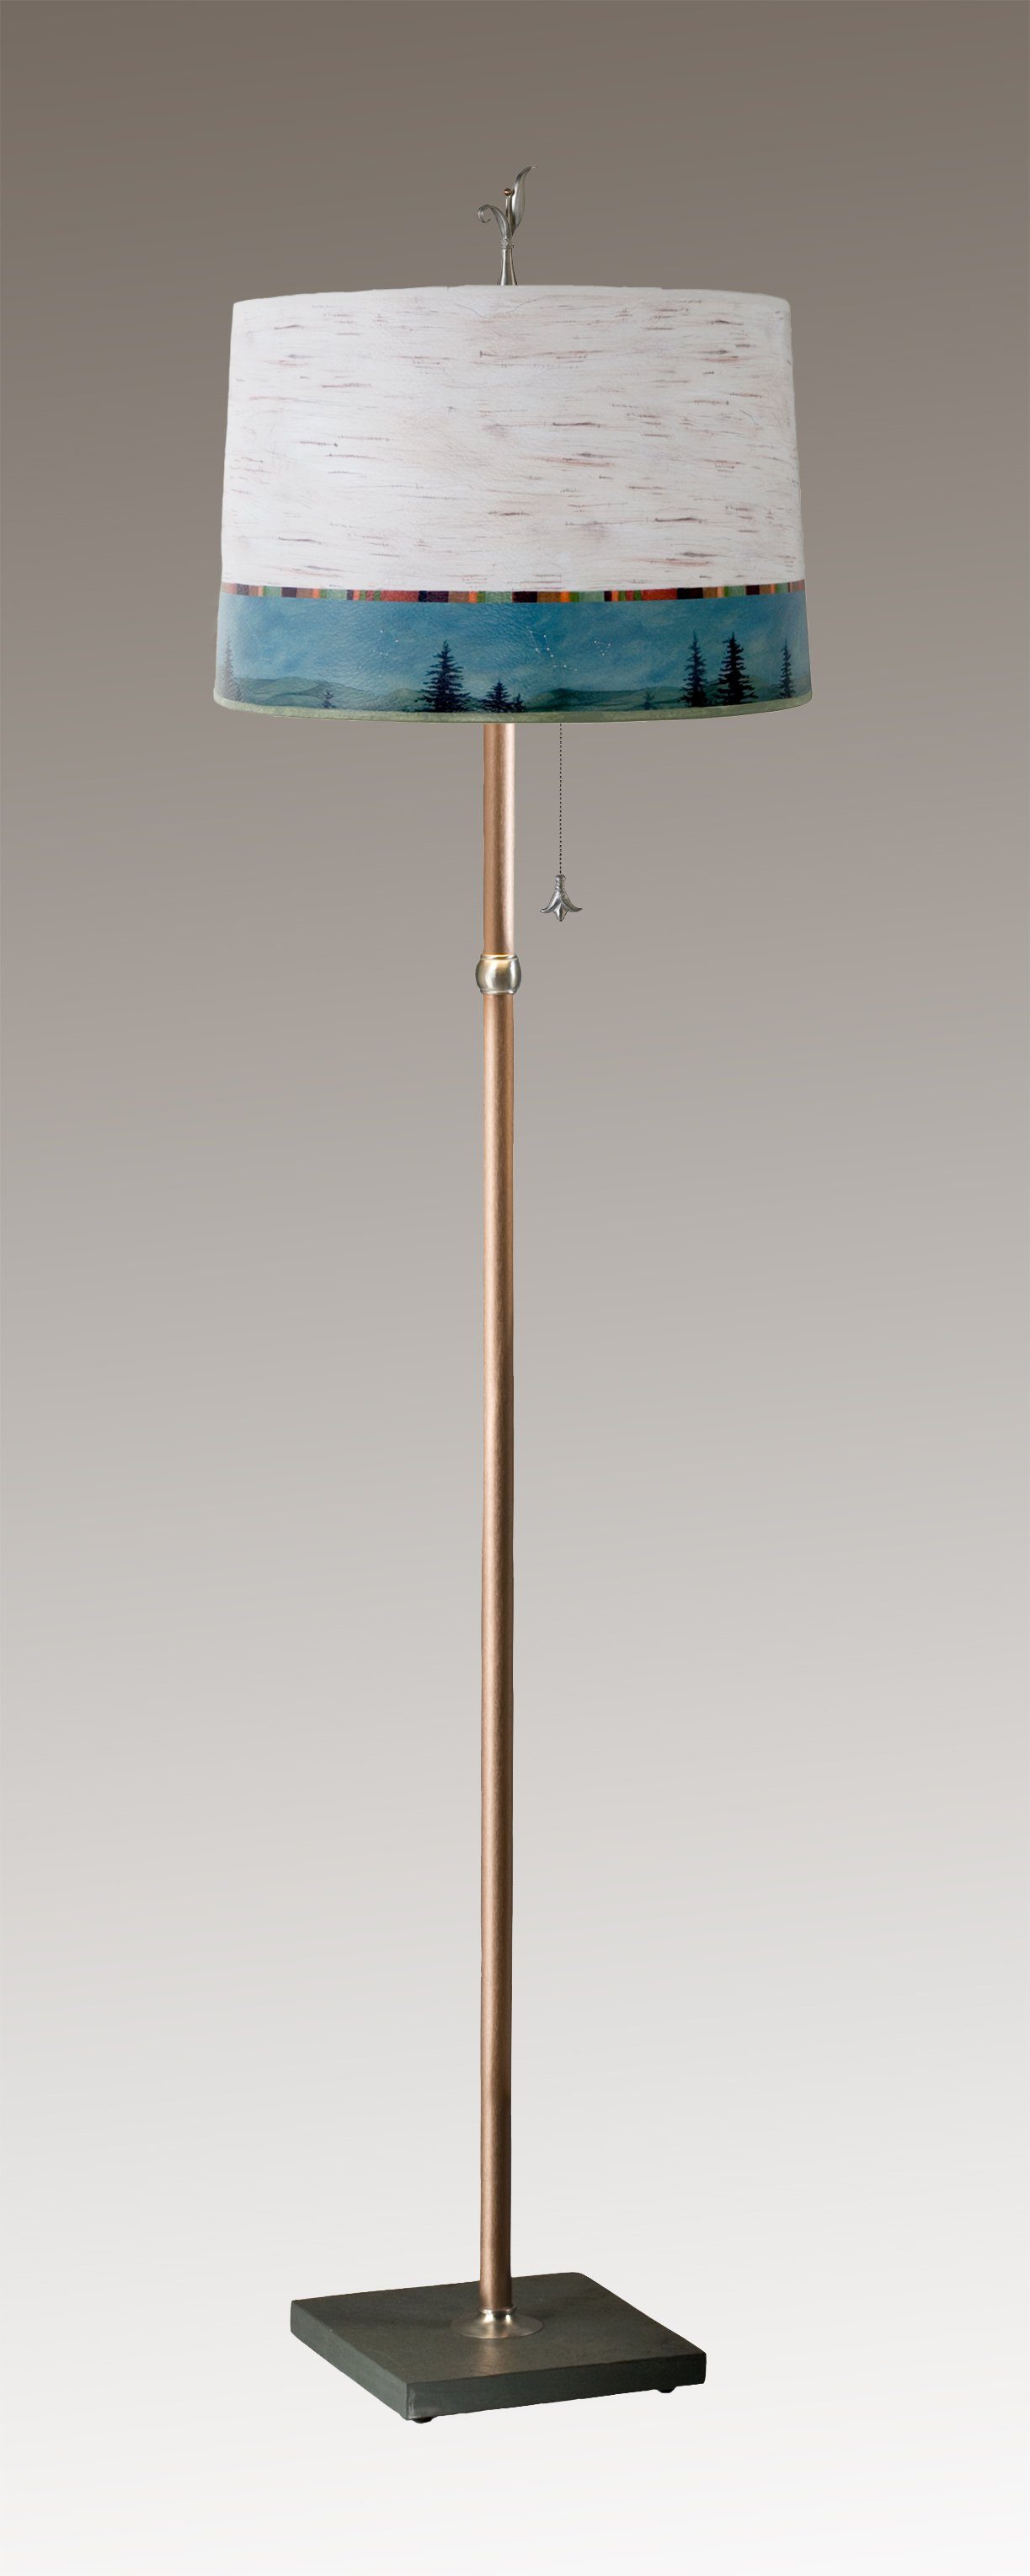 Janna Ugone & Co Floor Lamps Copper Floor Lamp with Large Drum Shade in Birch Midnight